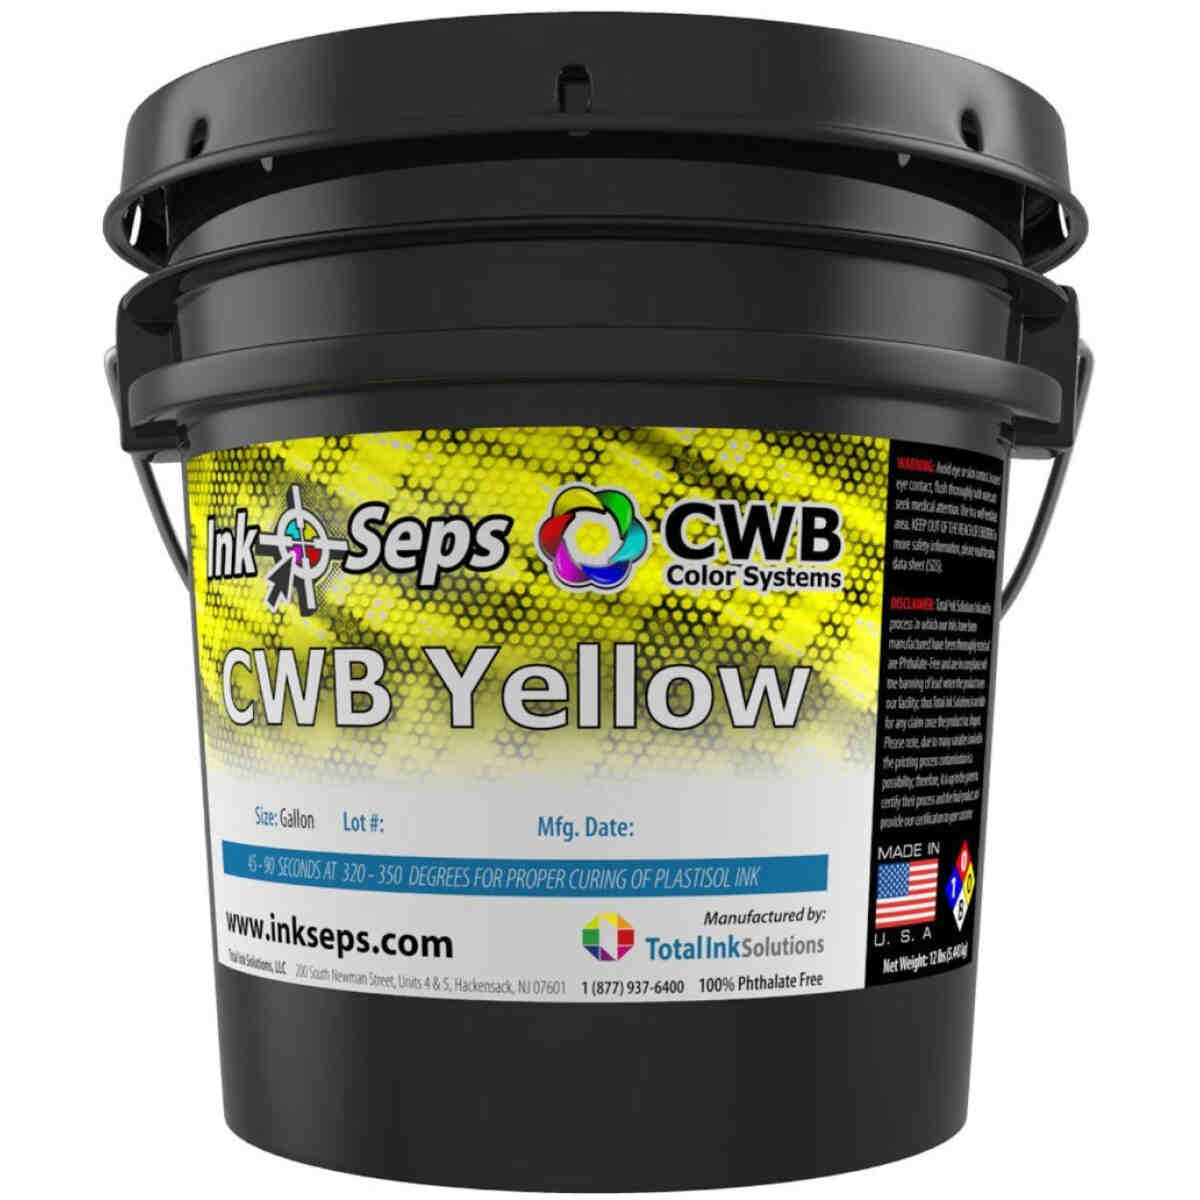 Cwb Yellow Simulated Process TOTAL INK SOLUTIONS®